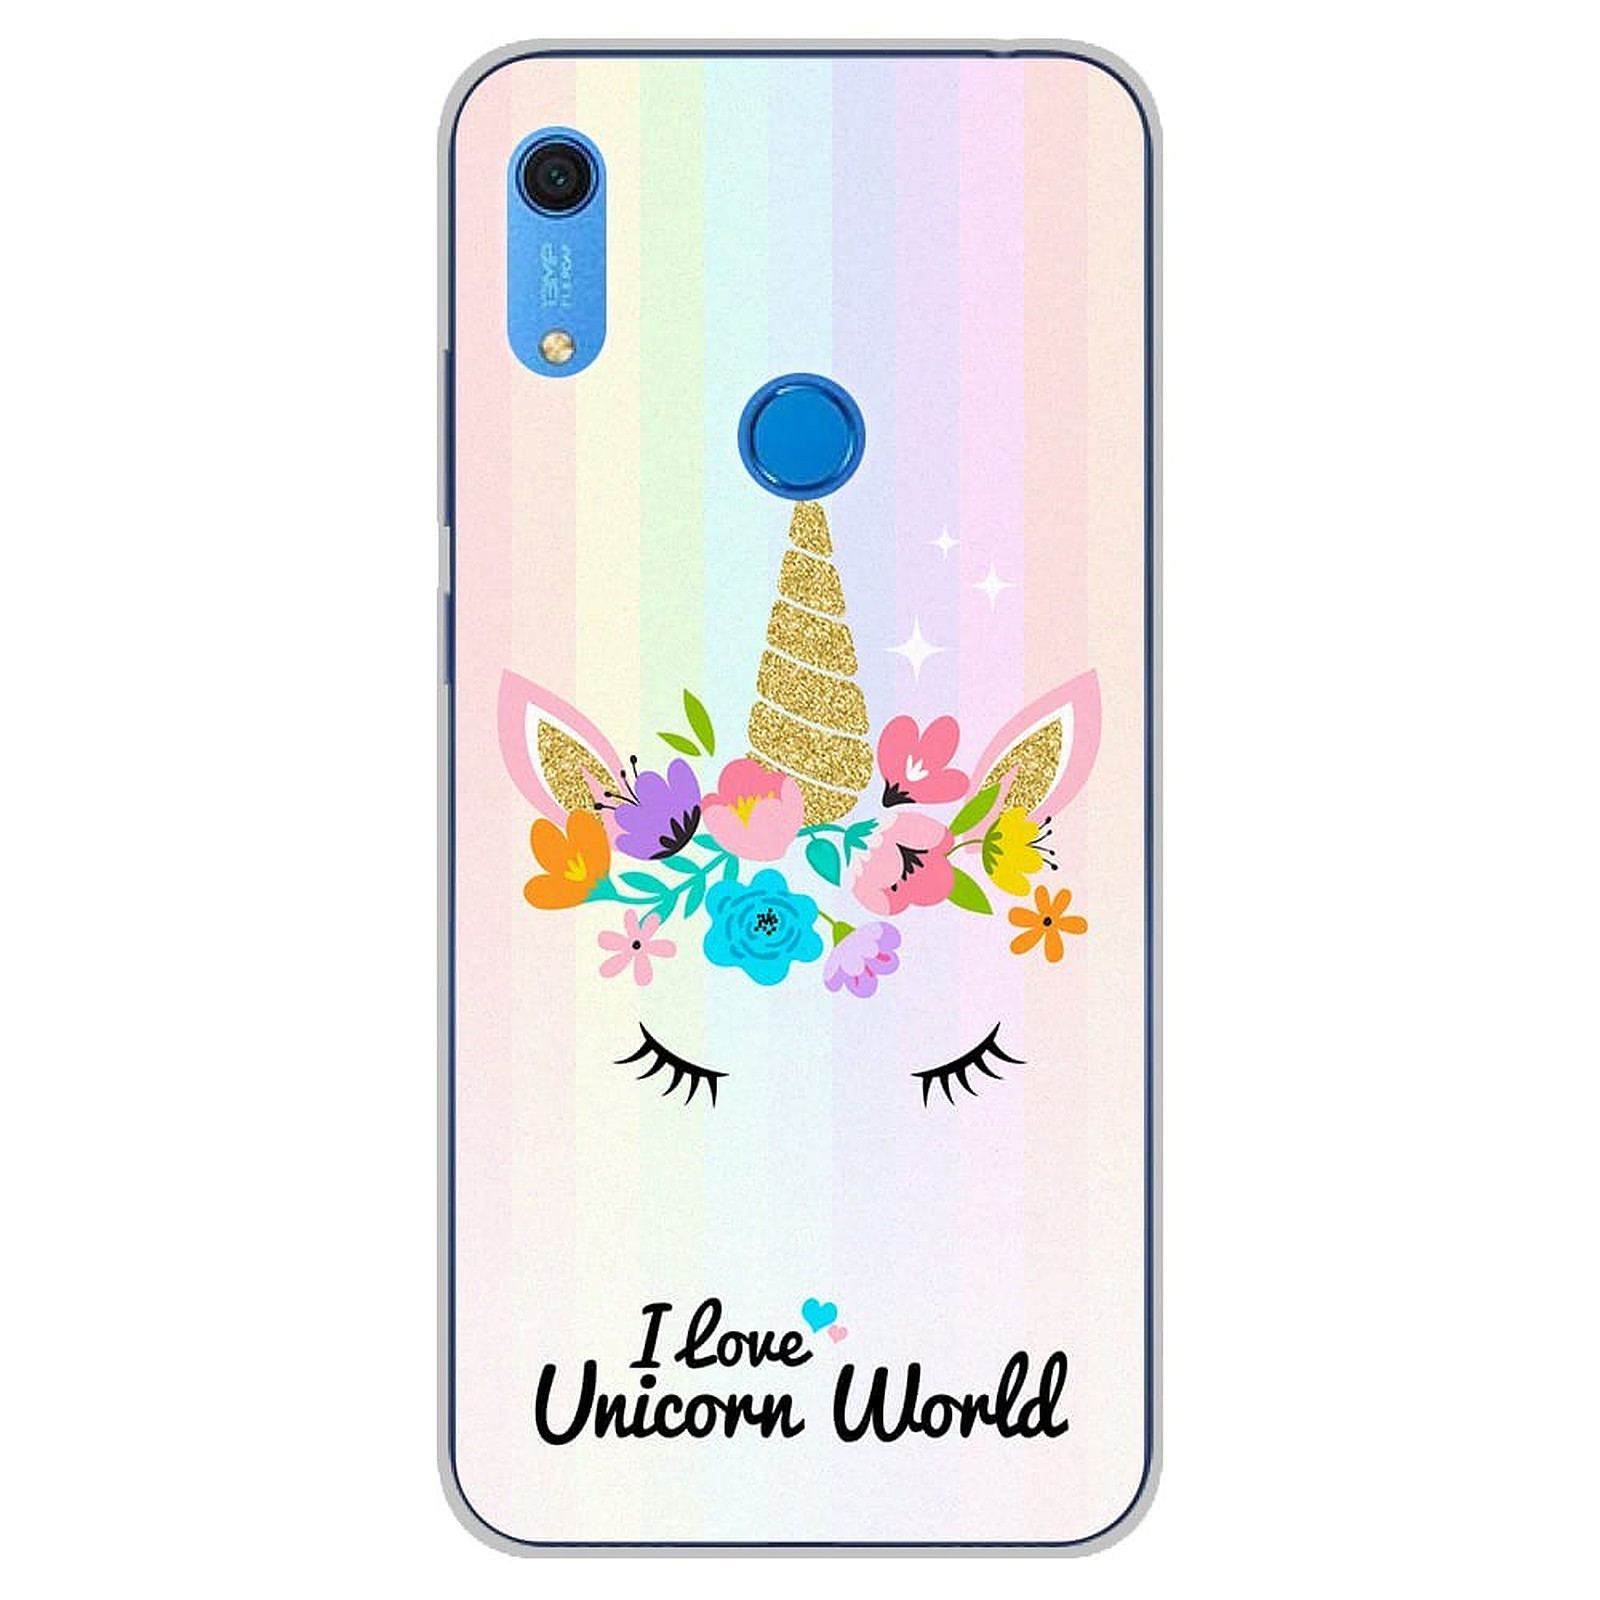 1001 Coques Coque silicone gel Huawei Y6S motif Unicorn World - Coque telephone 1001Coques